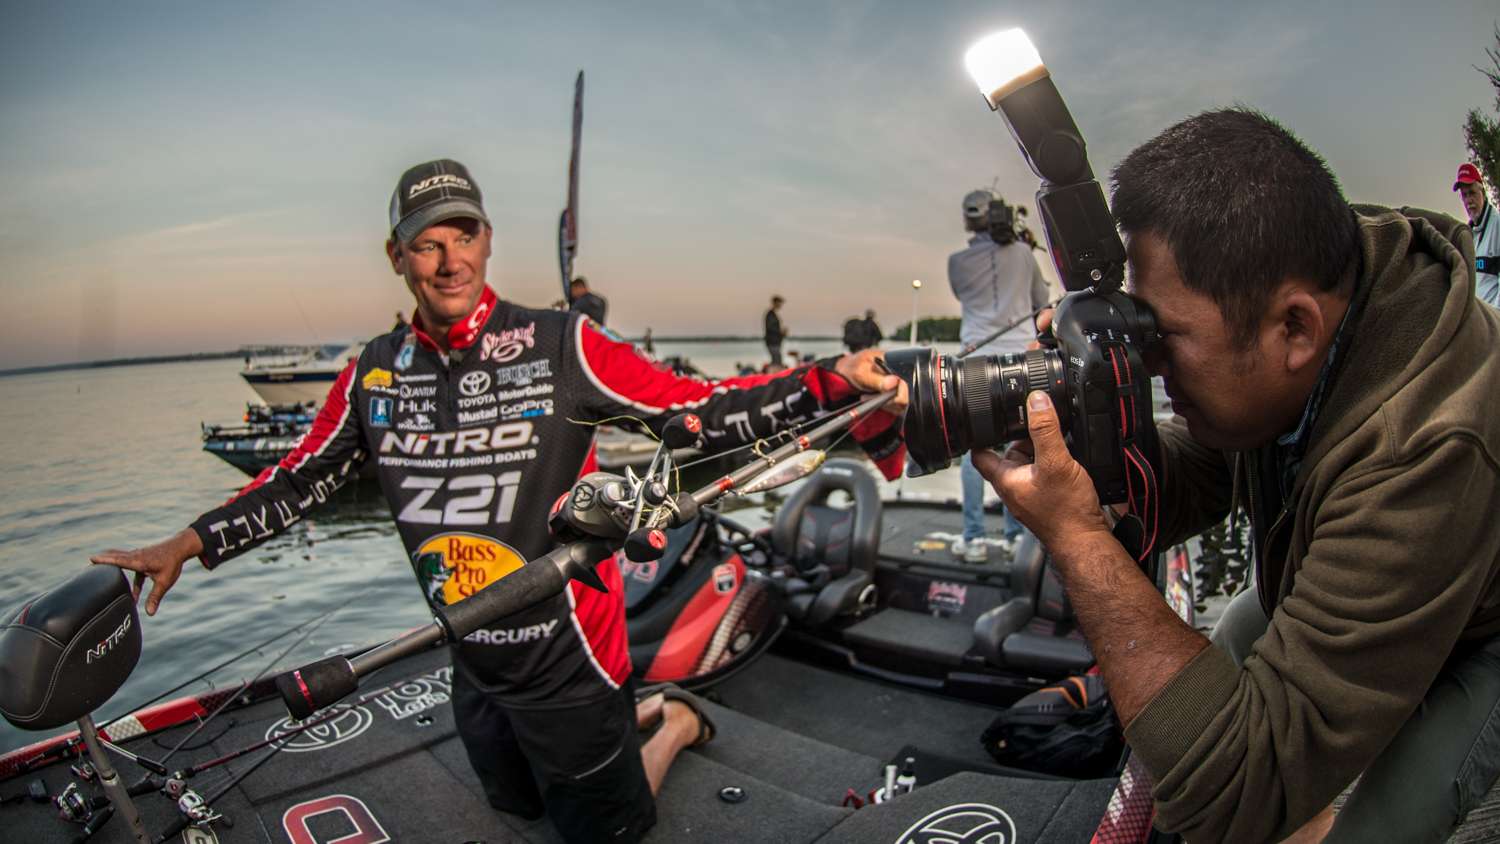 Seigo getting in there for a shot of Kevin VanDamâs bait. 